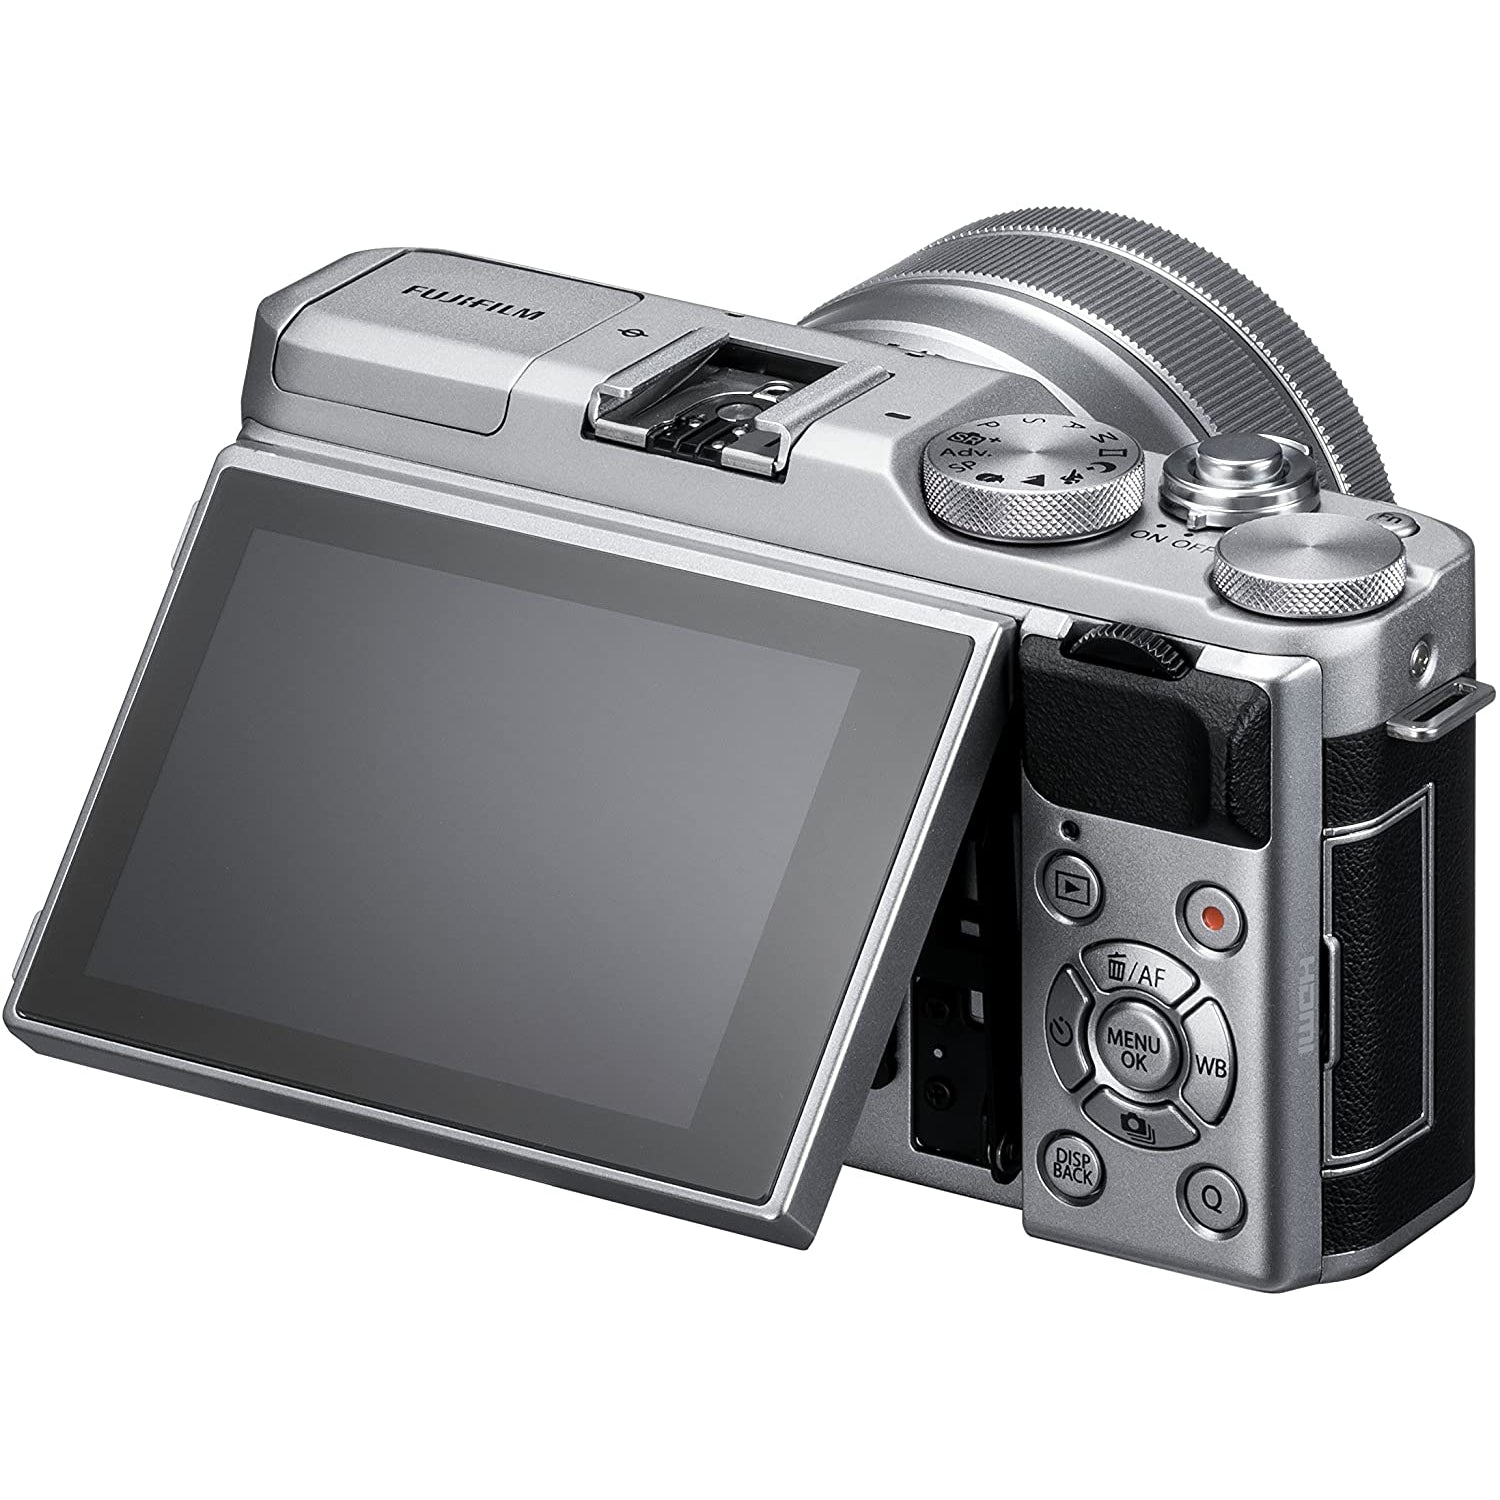 Fujifilm X-A5 Compact System Camera with XC 15-45mm OIS Lens, 24.2MP, Wi-Fi, Black & Silver